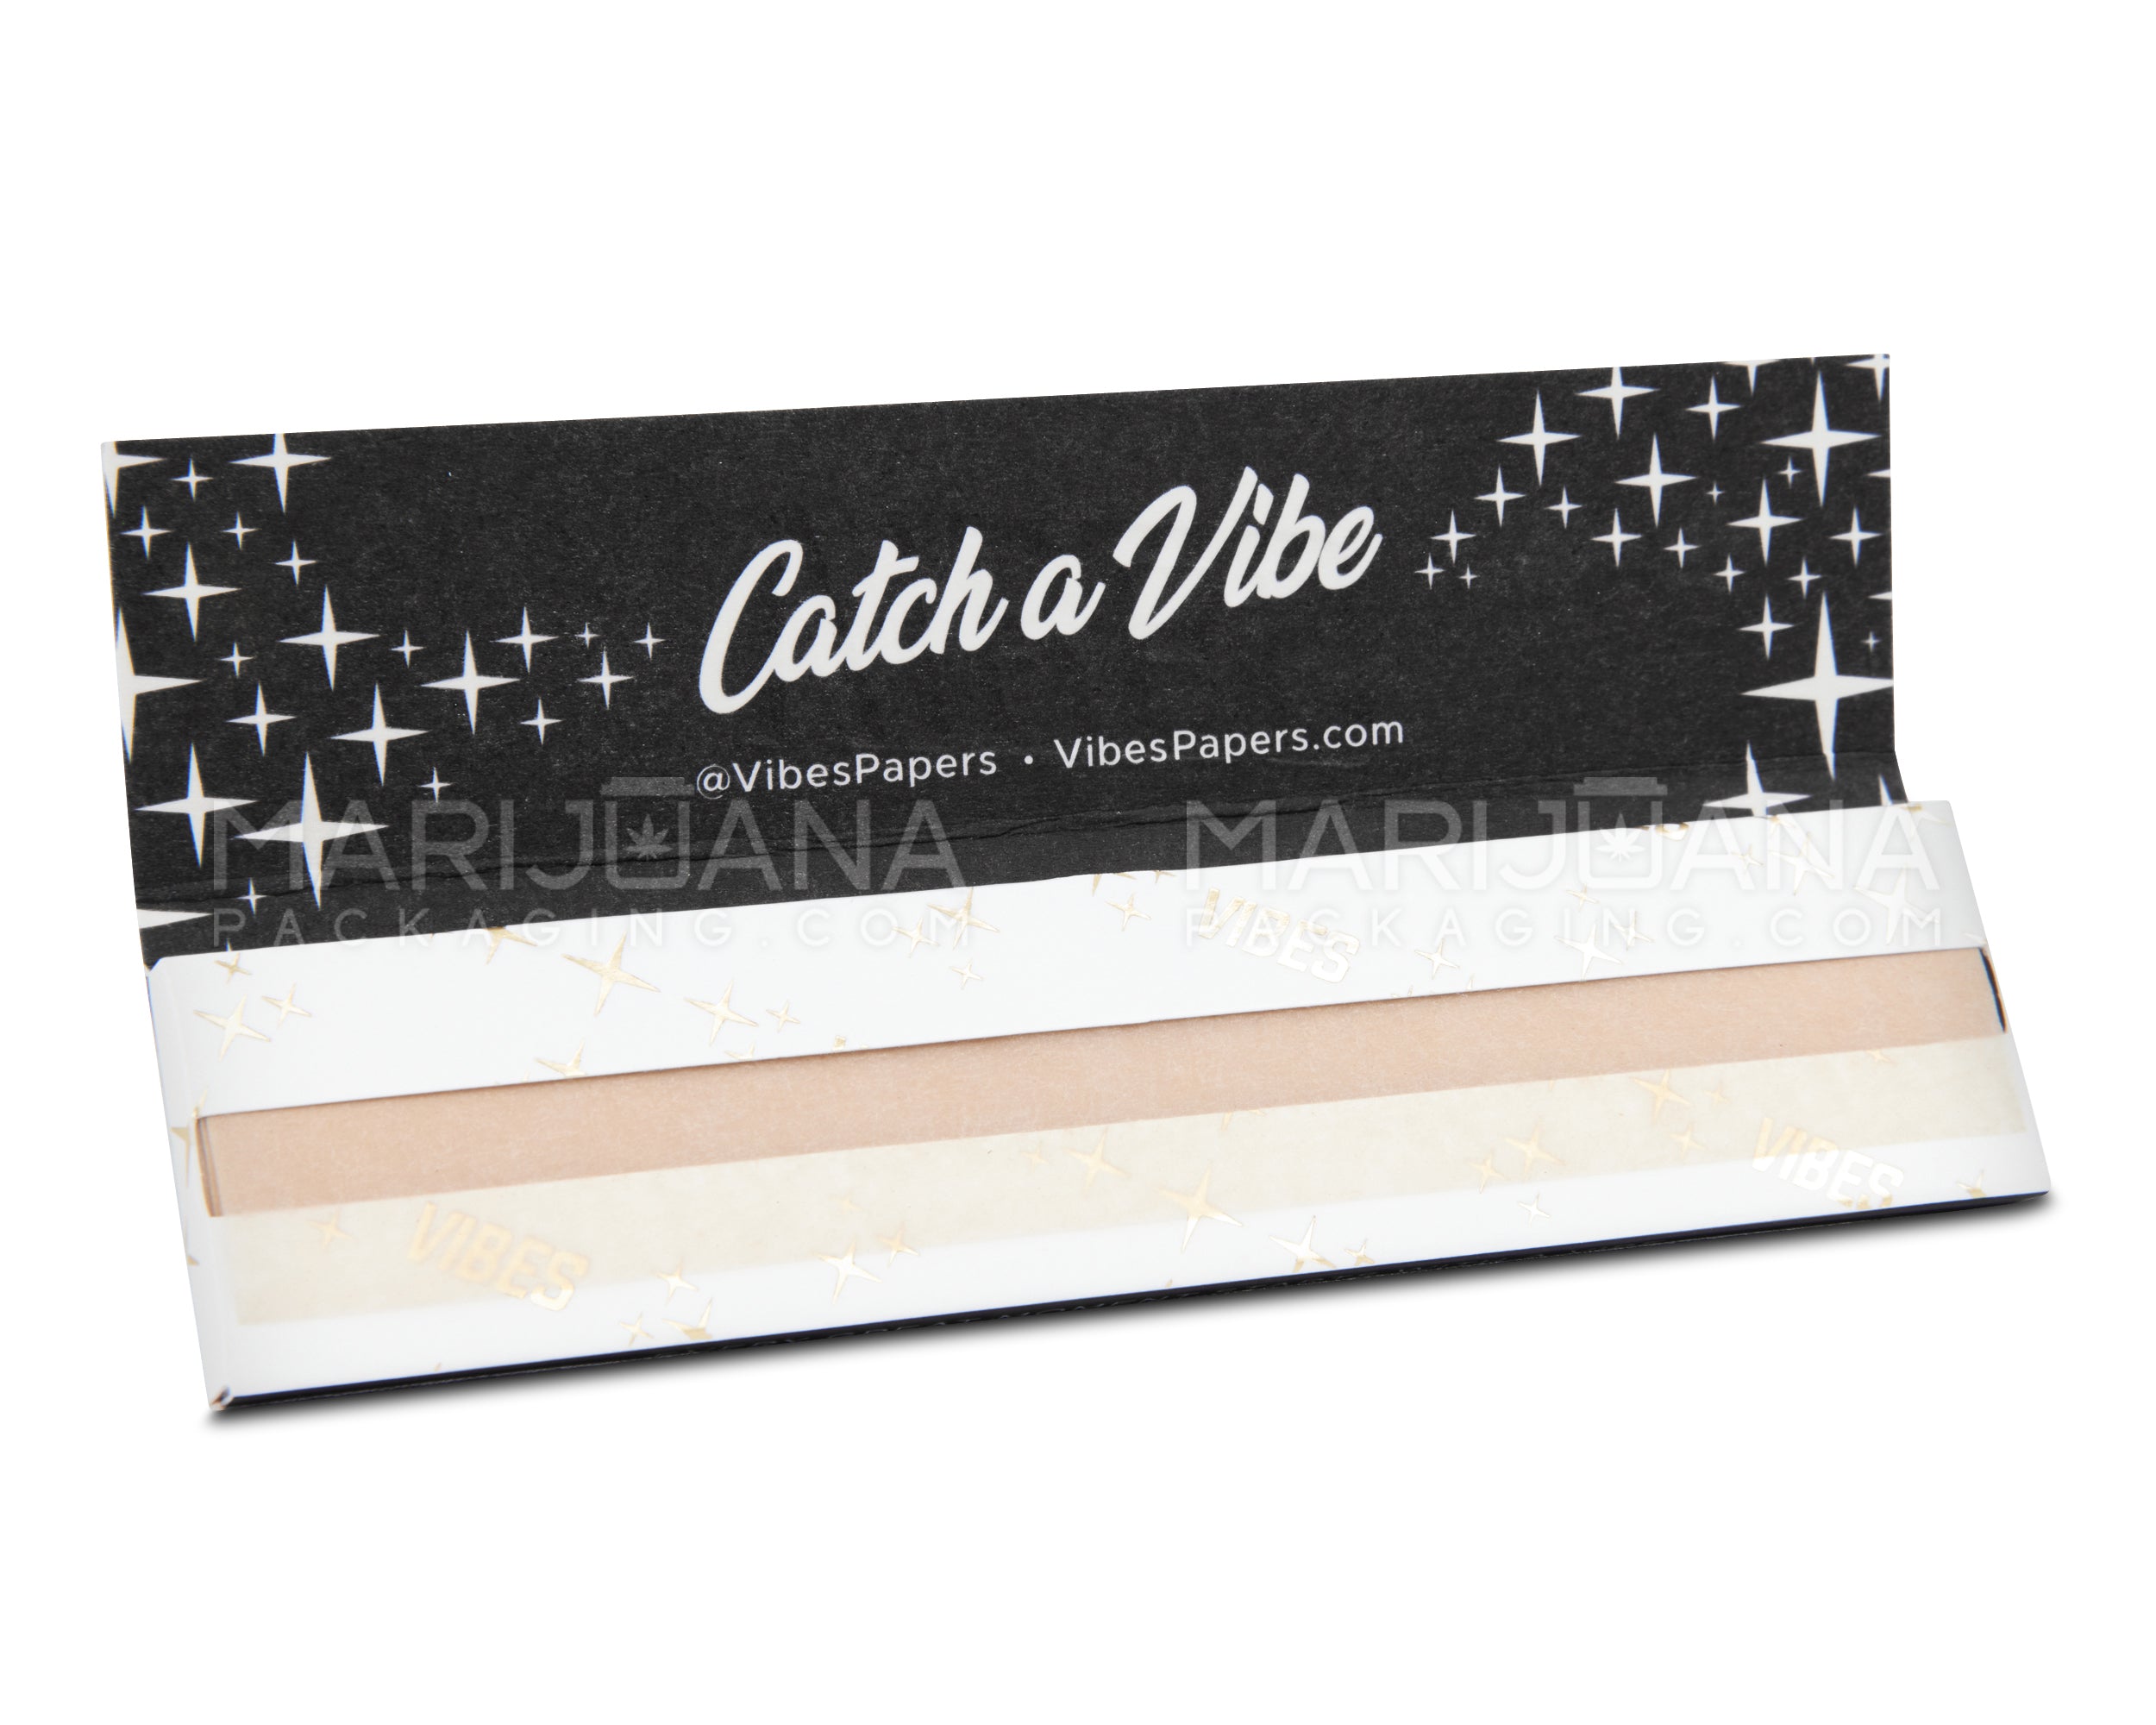 VIBES | 'Retail Display' King Size Rolling Papers | 109mm - Unbleached Paper - 50 Count - 3